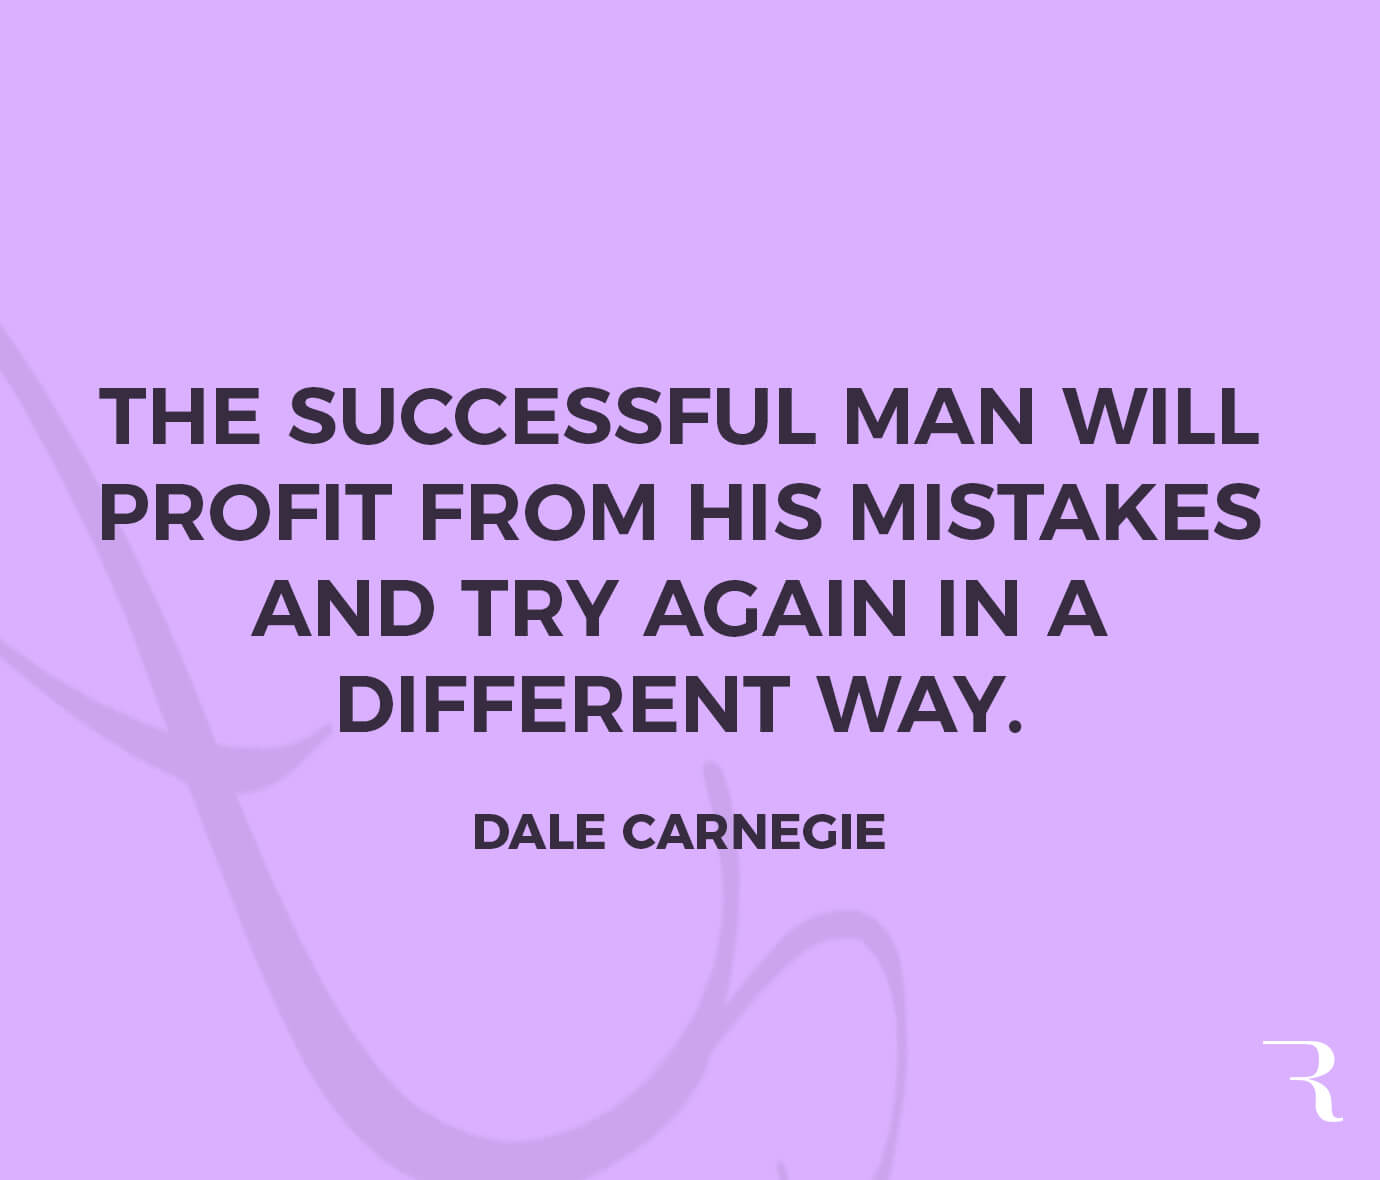 Motivational Quotes: "The successful man will profit from his mistakes and try again in a different way." 112 Motivational Quotes to Be a Better Entrepreneur